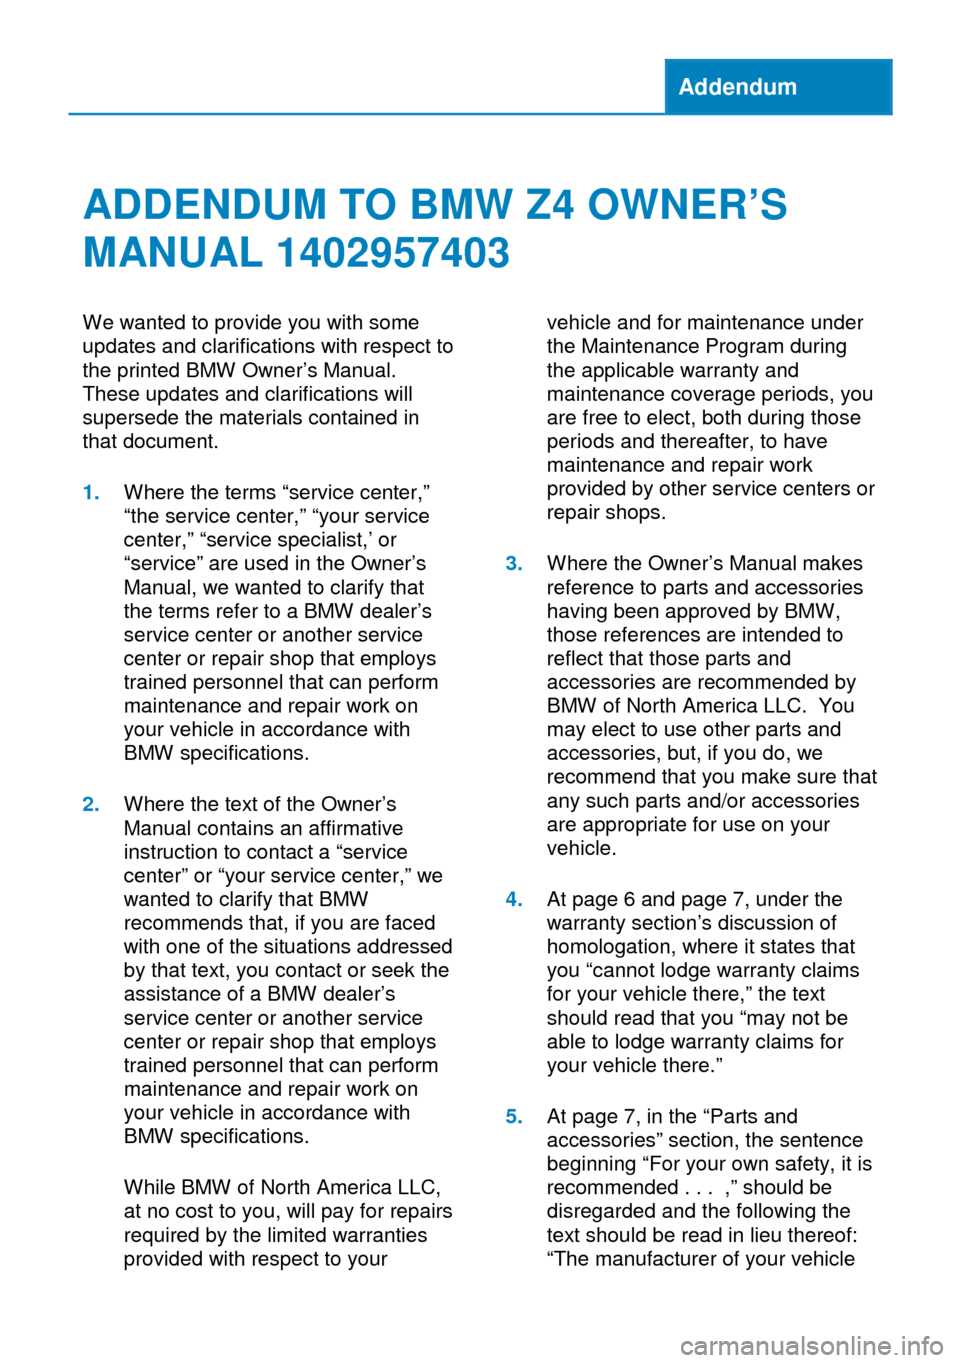 BMW Z4 2016 E89 Owners Manual Addendum
ADDENDUM TO BMW Z4 OWNER’S
MANUAL 1402957403
We wanted to provide you with some
updates and clarifications with respect to
the printed BMW Owner’s Manual.
These updates and clarifications